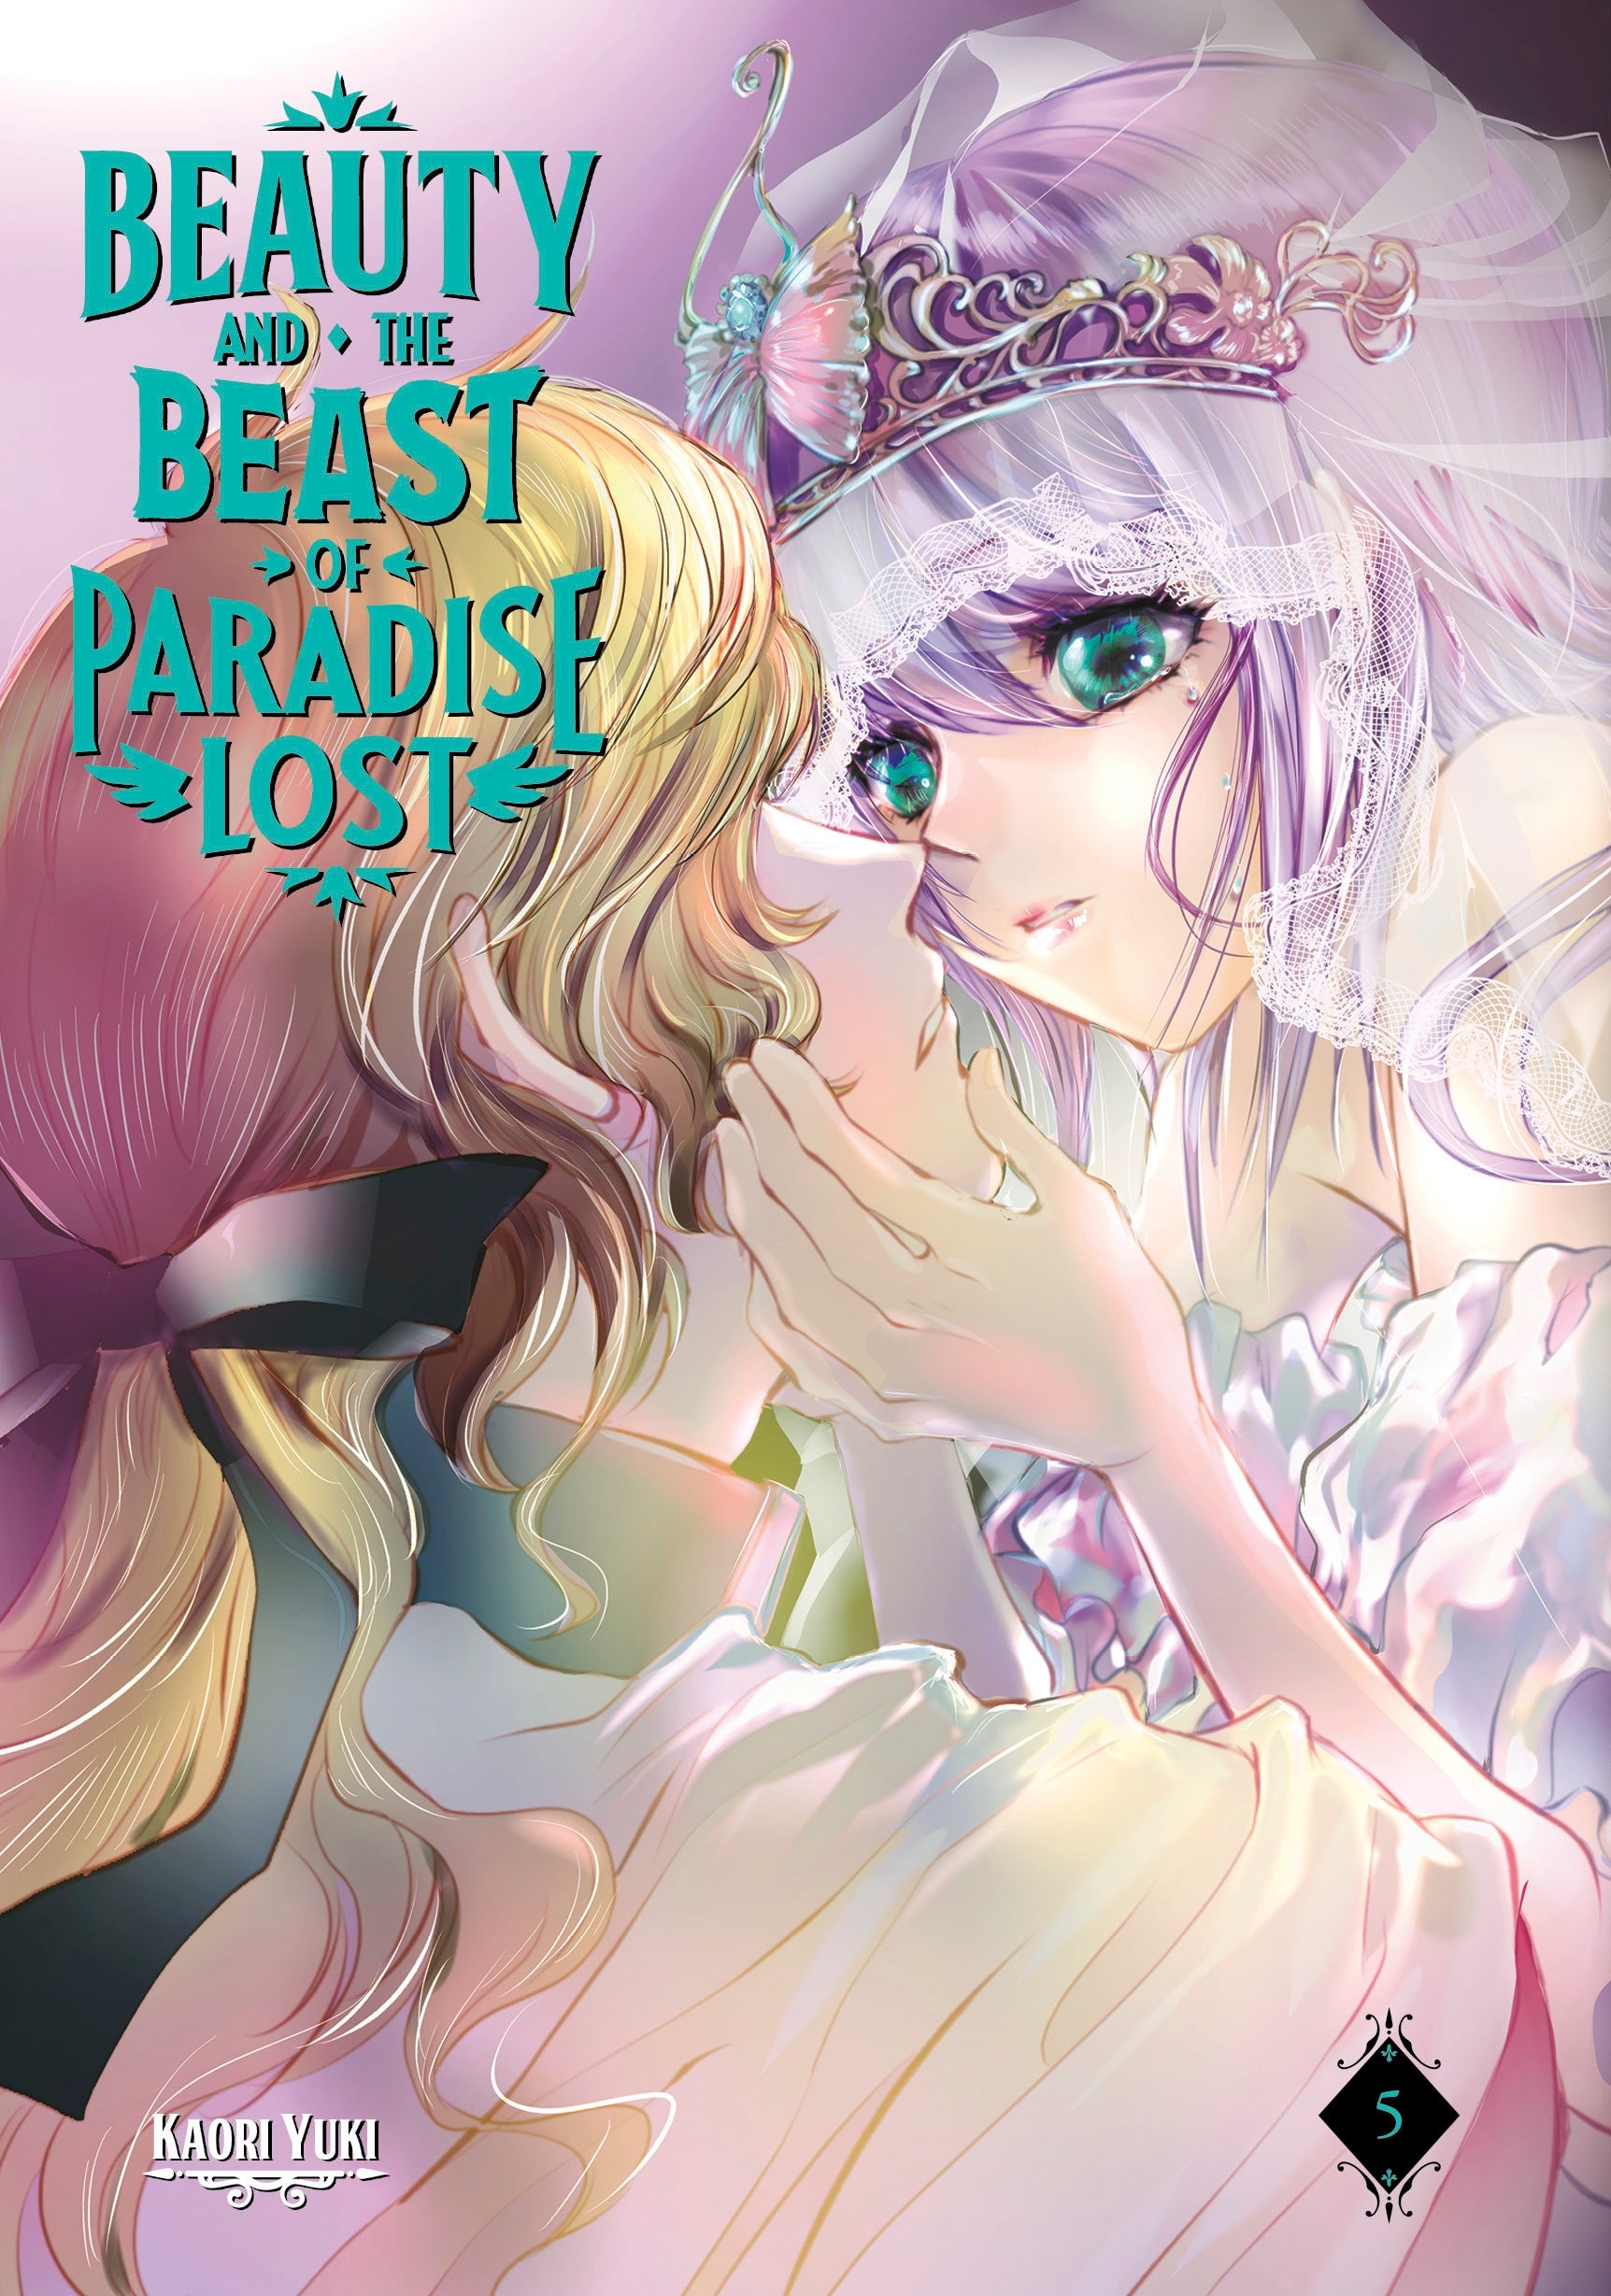 Beauty and the Beast of Paradise Lost - Vol. 5